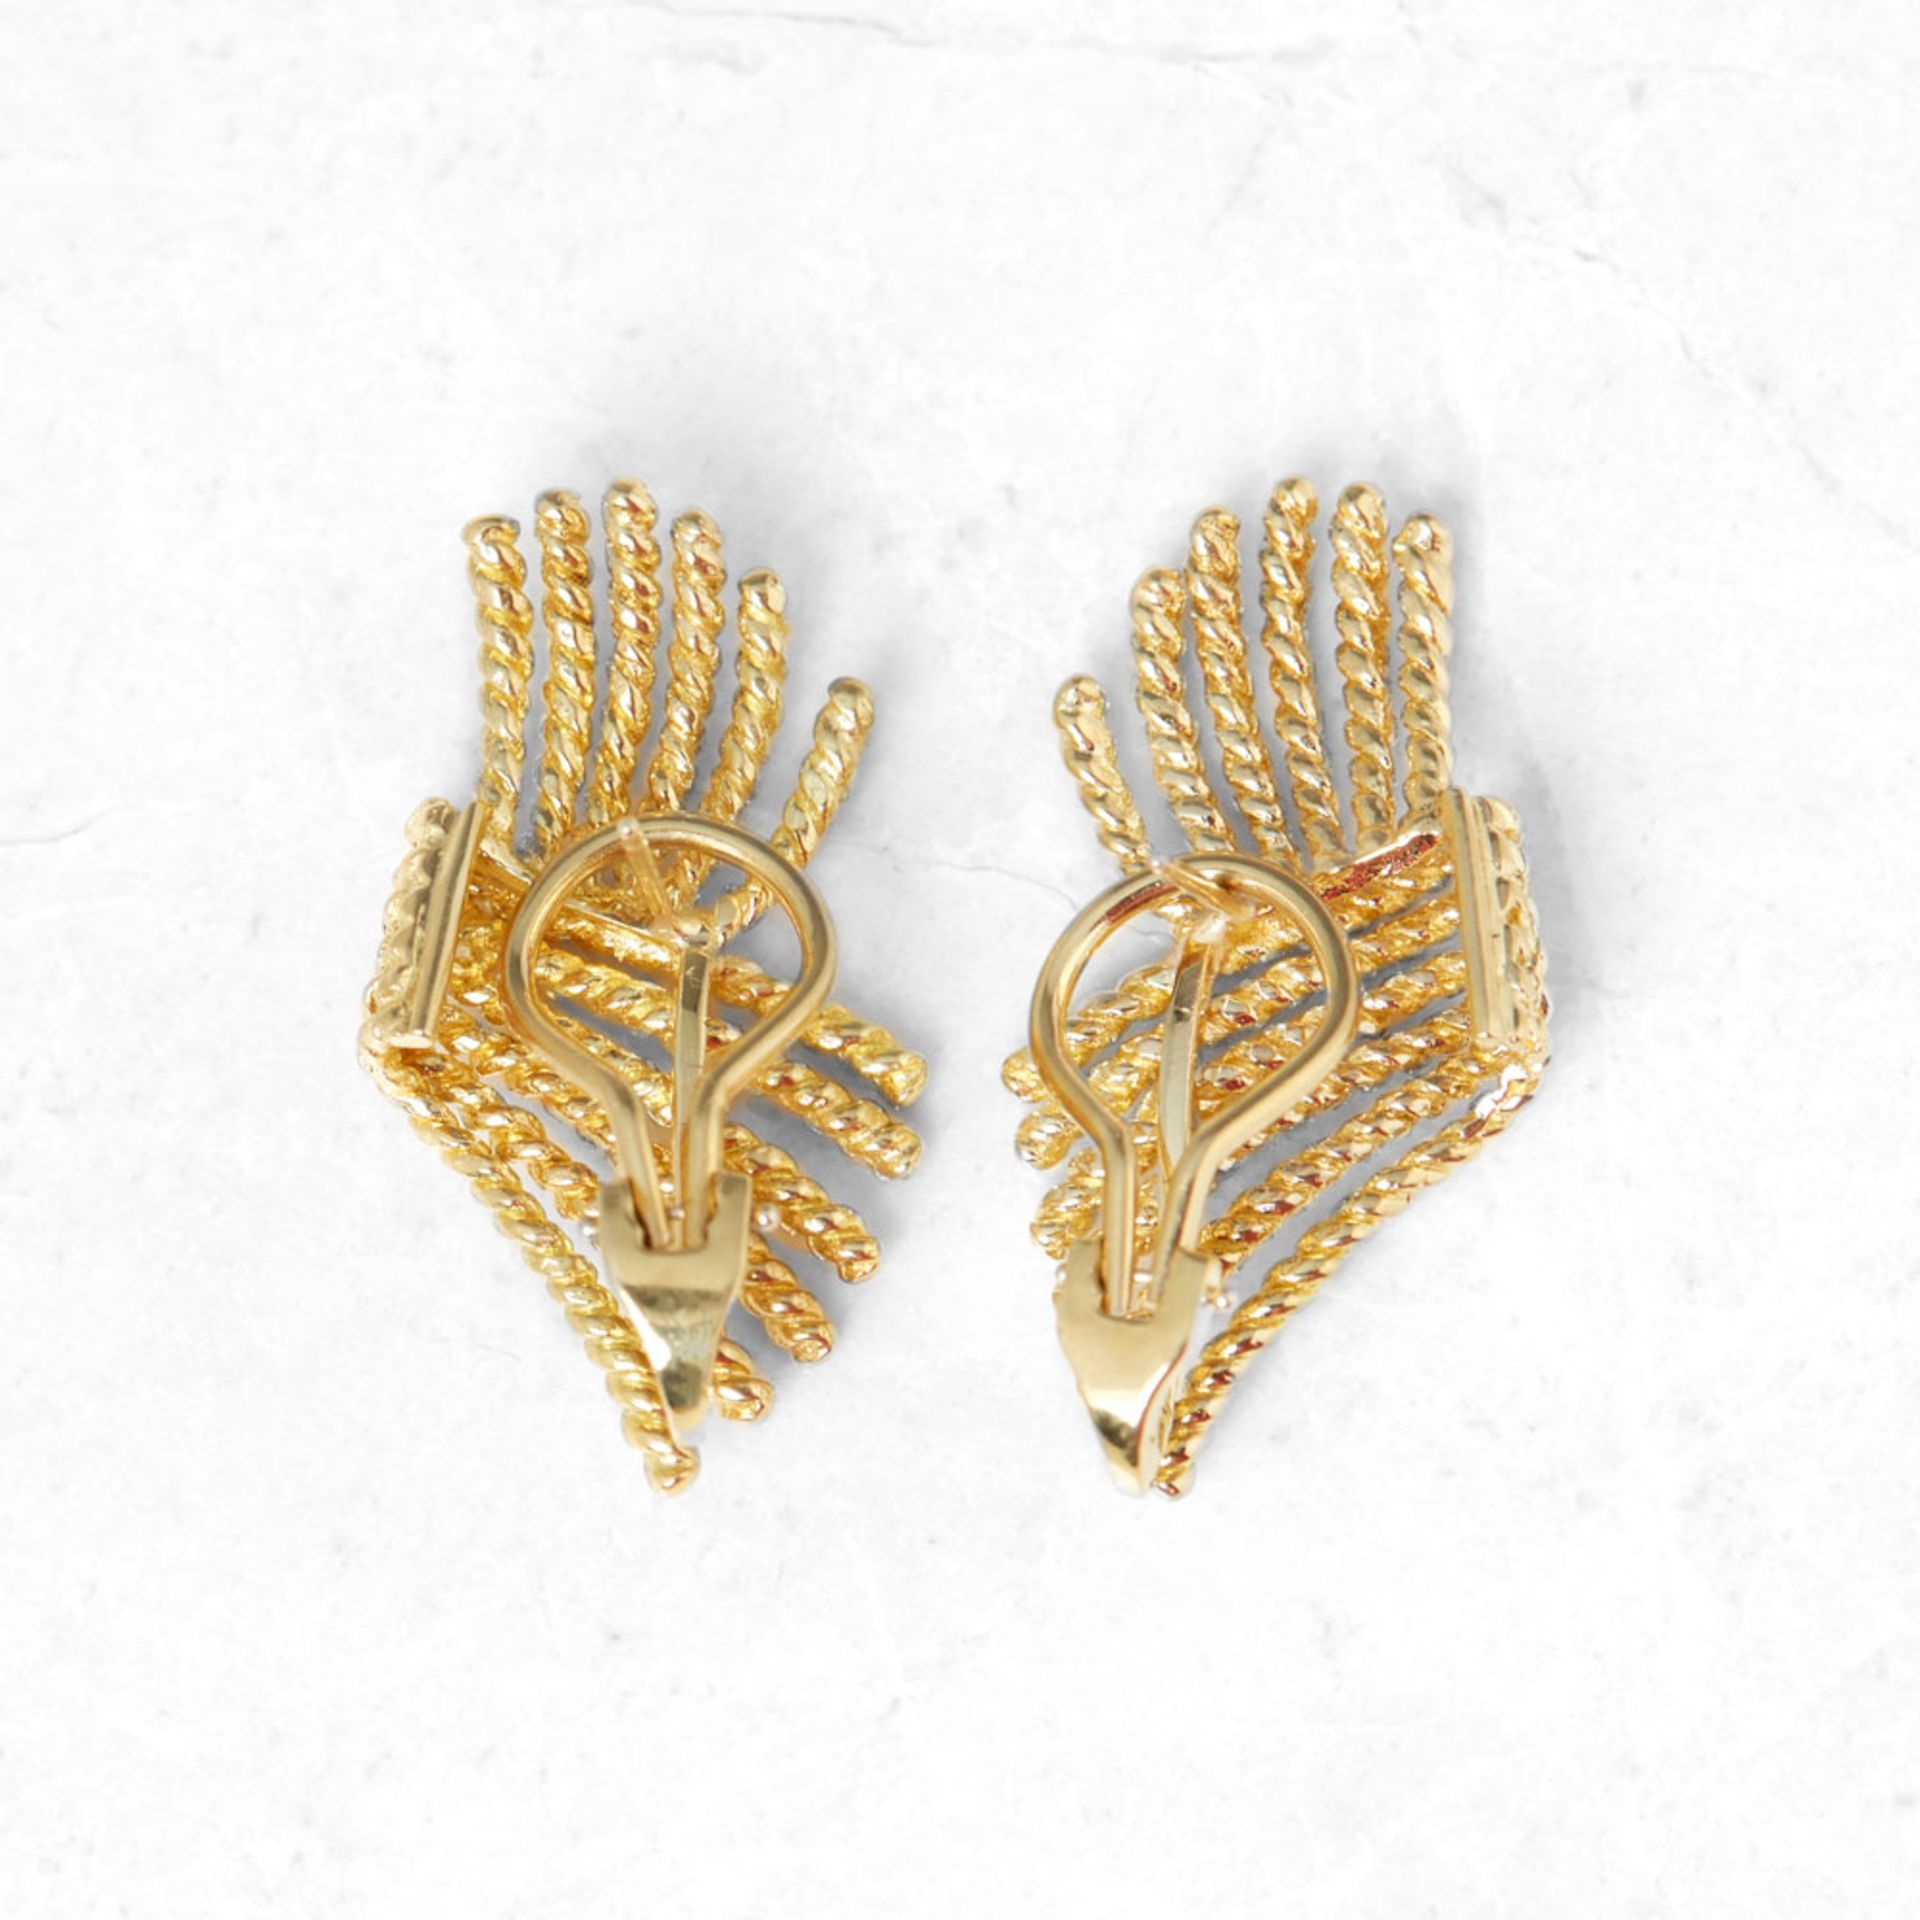 Tiffany & Co. 18k Yellow Gold Rope Design Schlumberger Earrings - Image 5 of 5